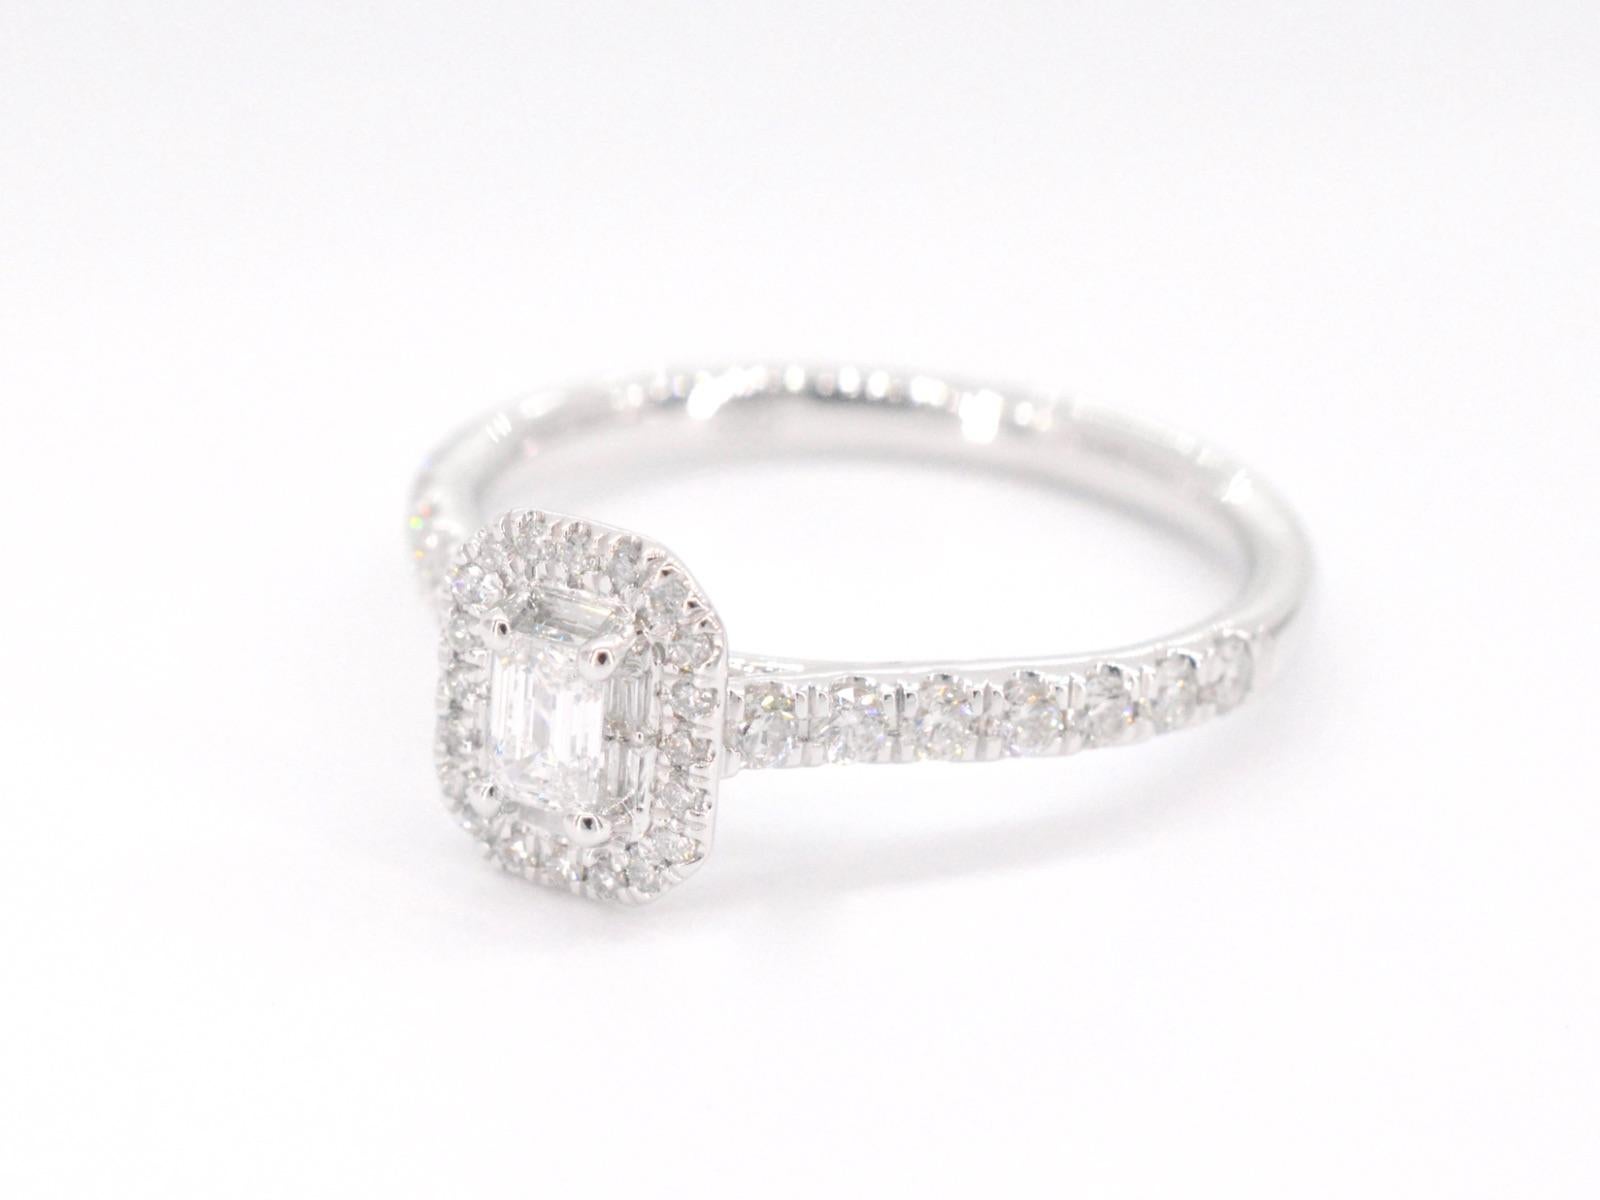 A white gold entourage ring with a center baguette cut stone and brilliant cut diamonds is a stunning piece of jewelry that combines classic and modern elements. The baguette cut stone is surrounded by smaller, sparkling diamonds that enhance its